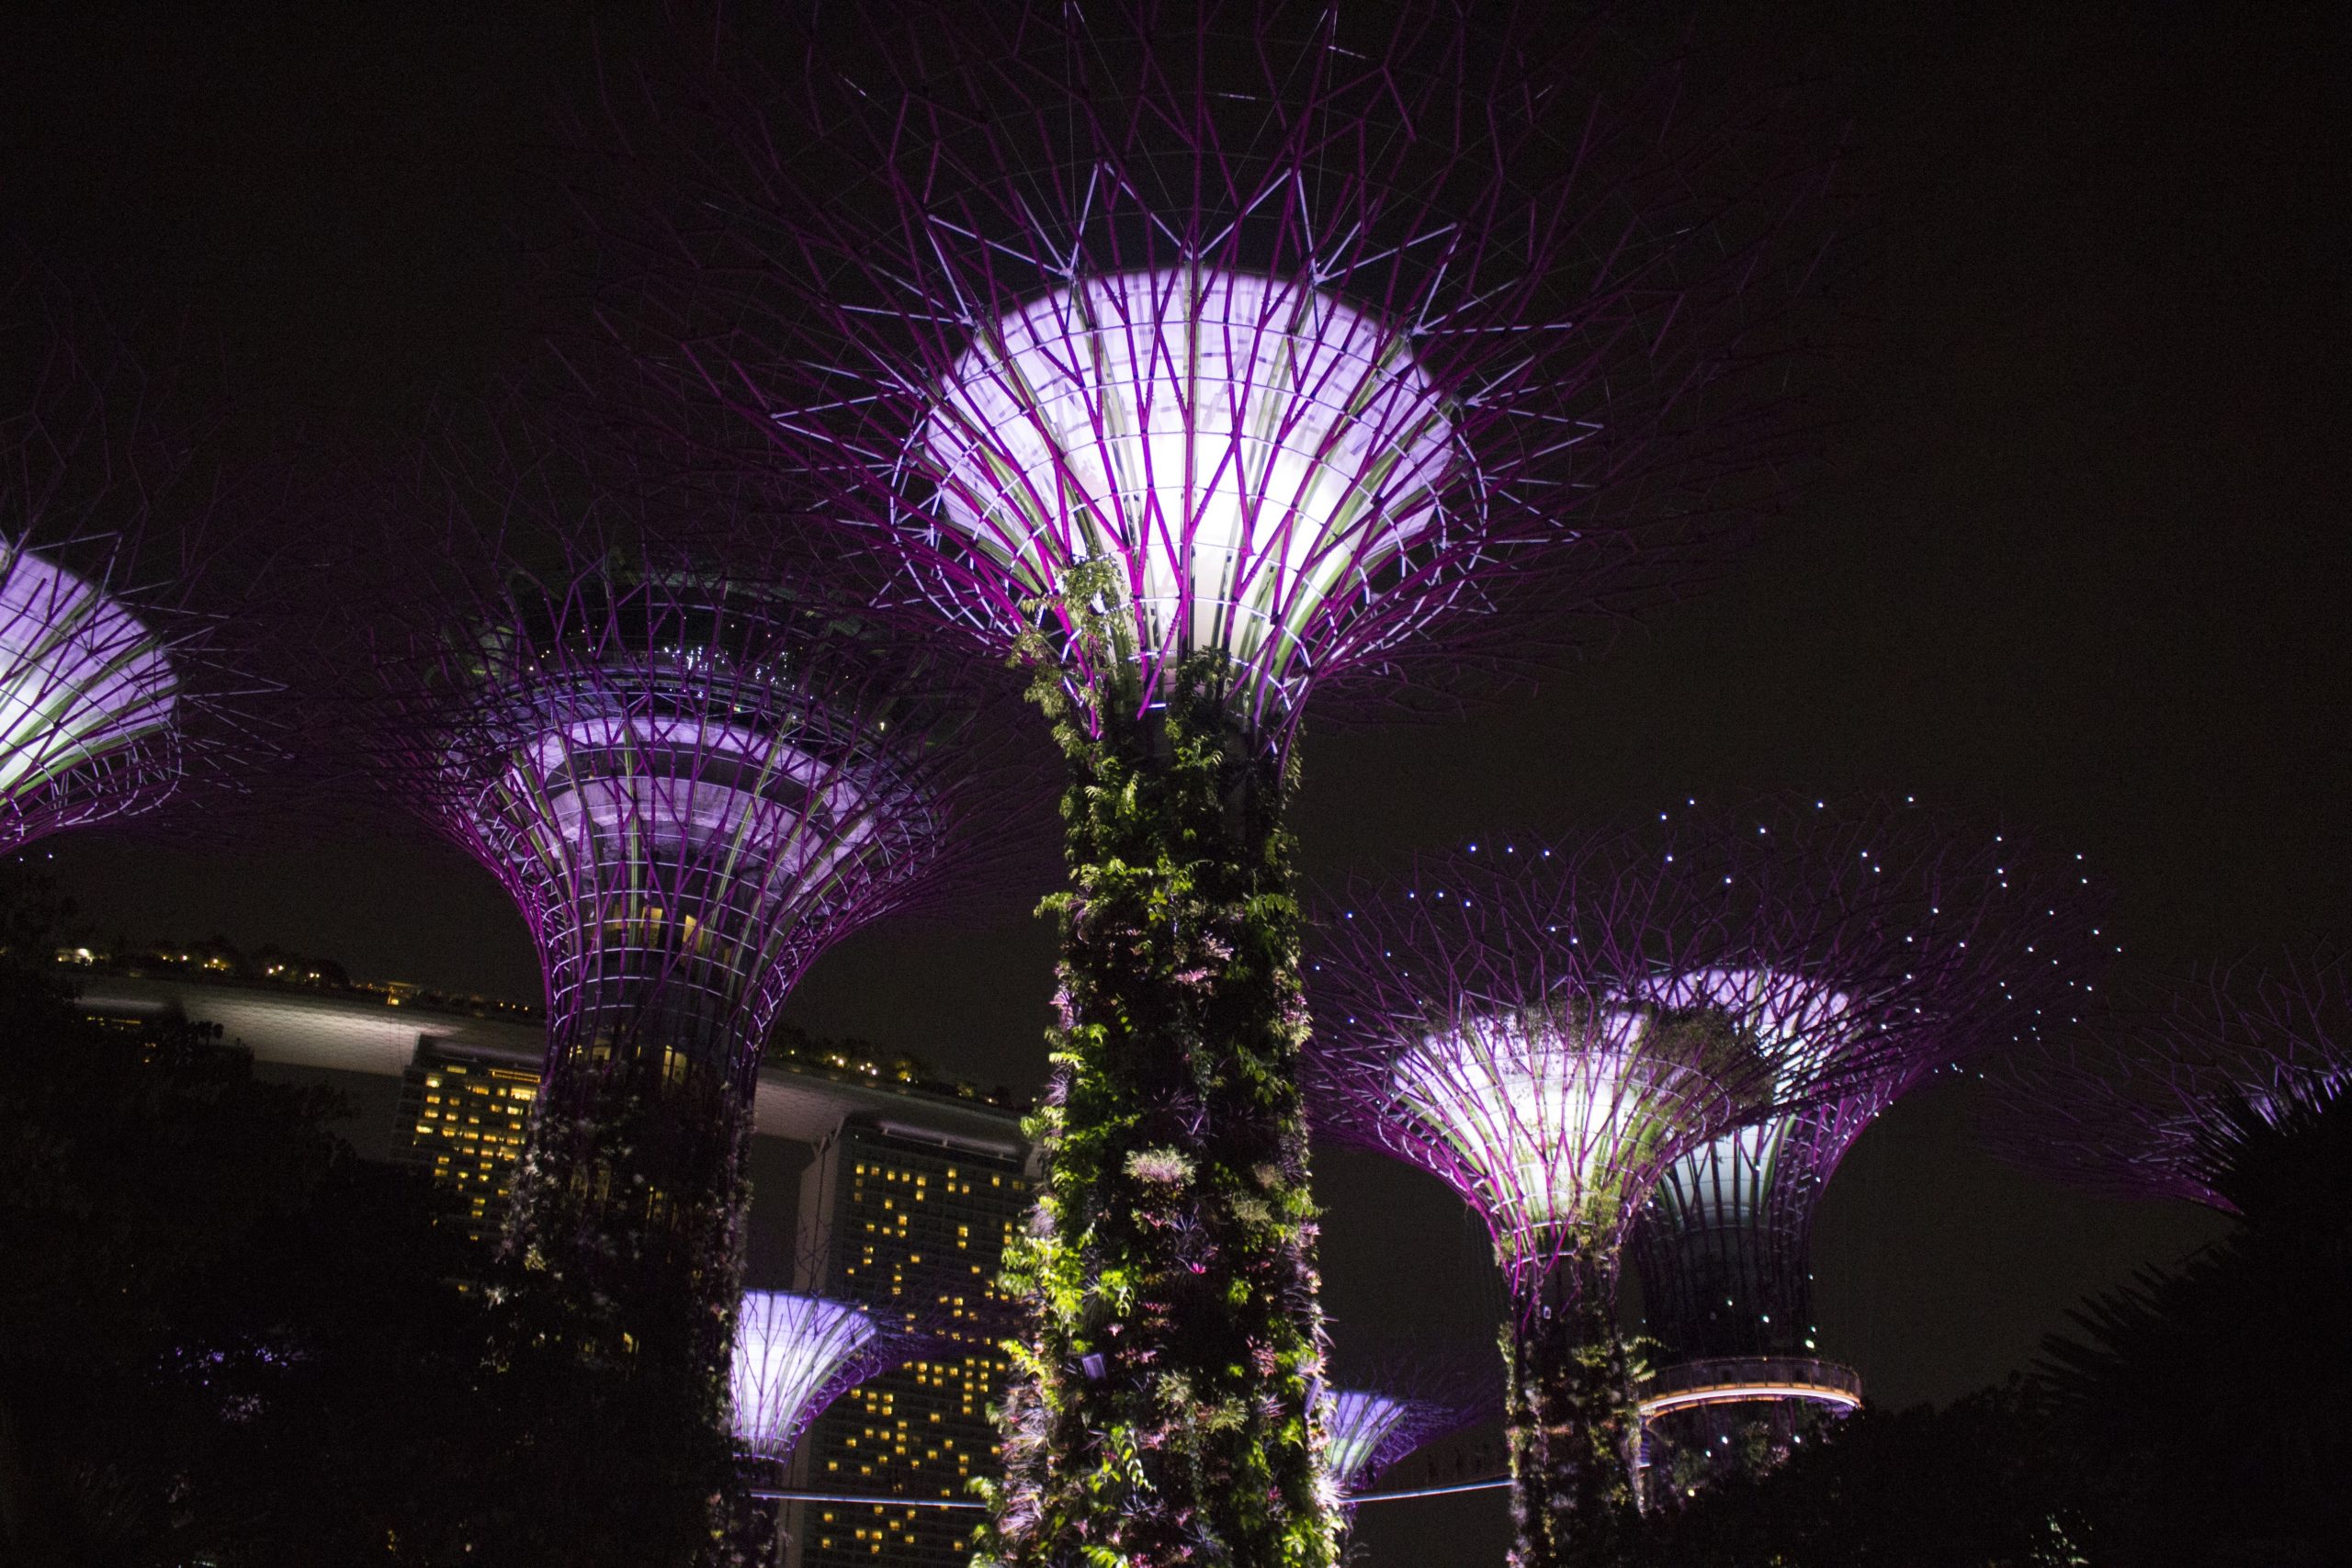 Gardens by the Bay and Parkroyal Hotel (Singapore) from Chris Woods's book 